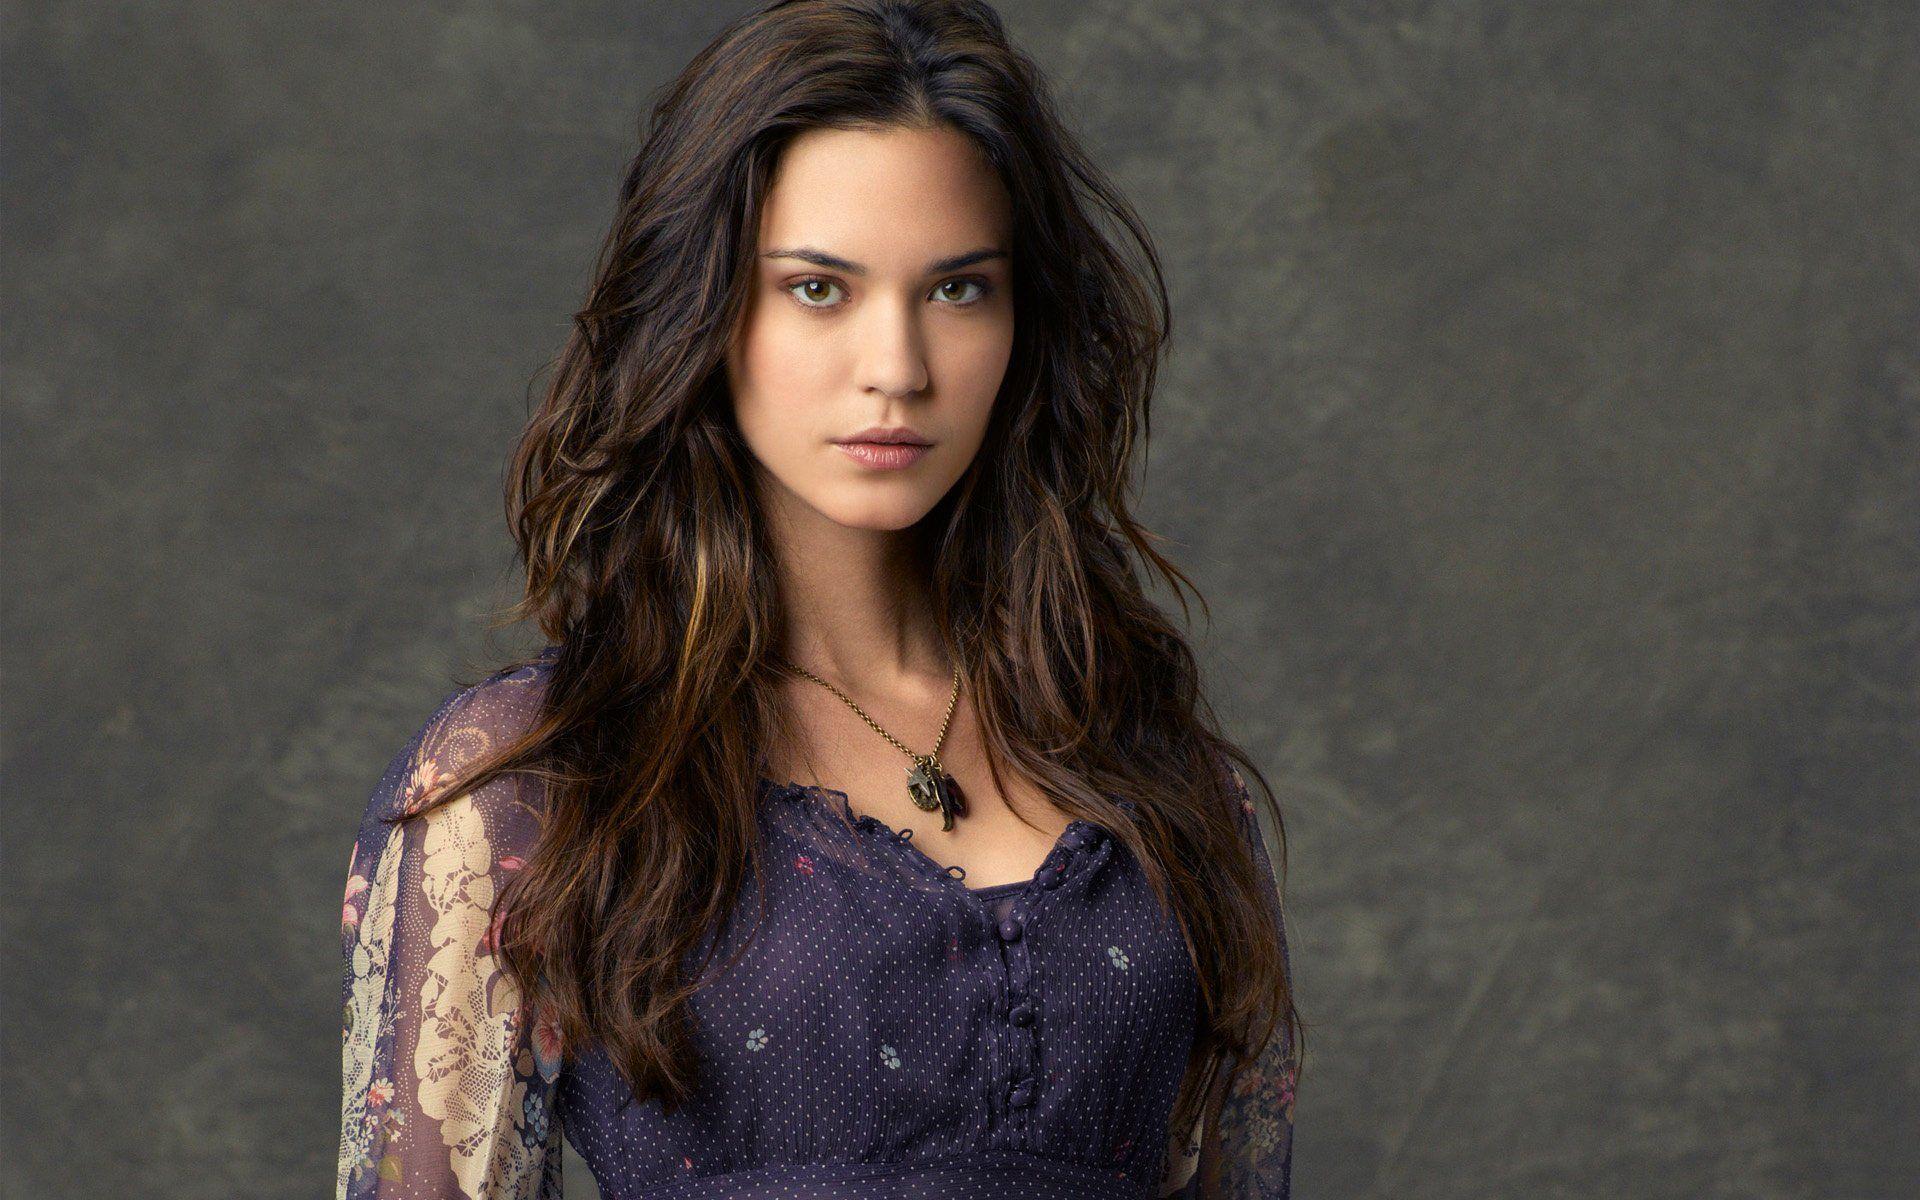 Odette Annable [source Wallpaper Cave]